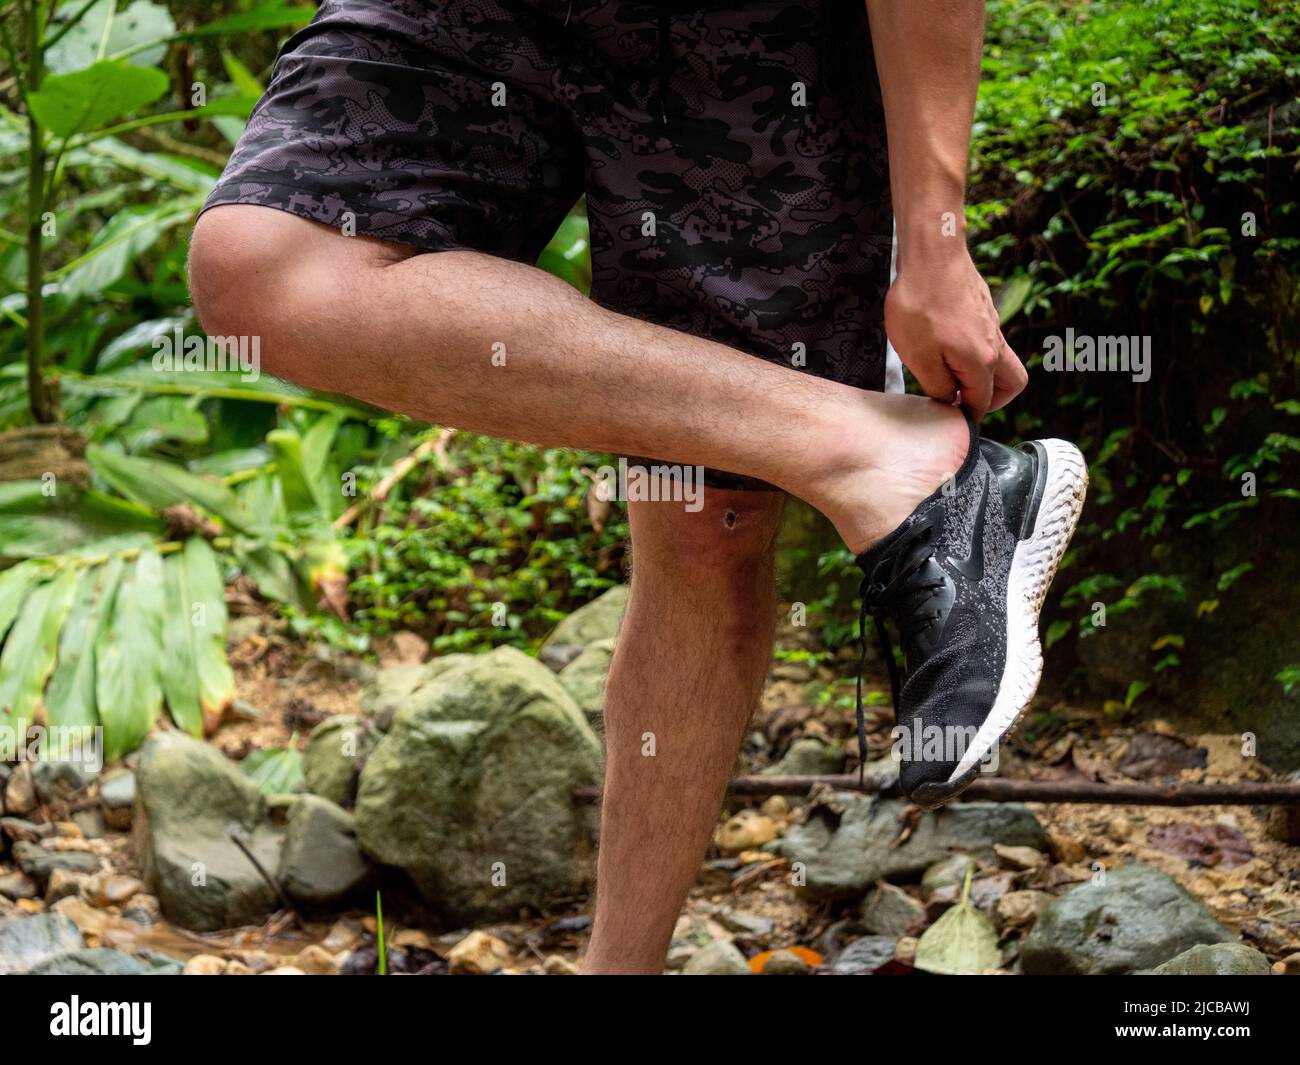 La Estrella, Antioquia, Colombia - February 13 2022: Man Taking out his Shoes in the Dirty Road of the Forest Stock Photo